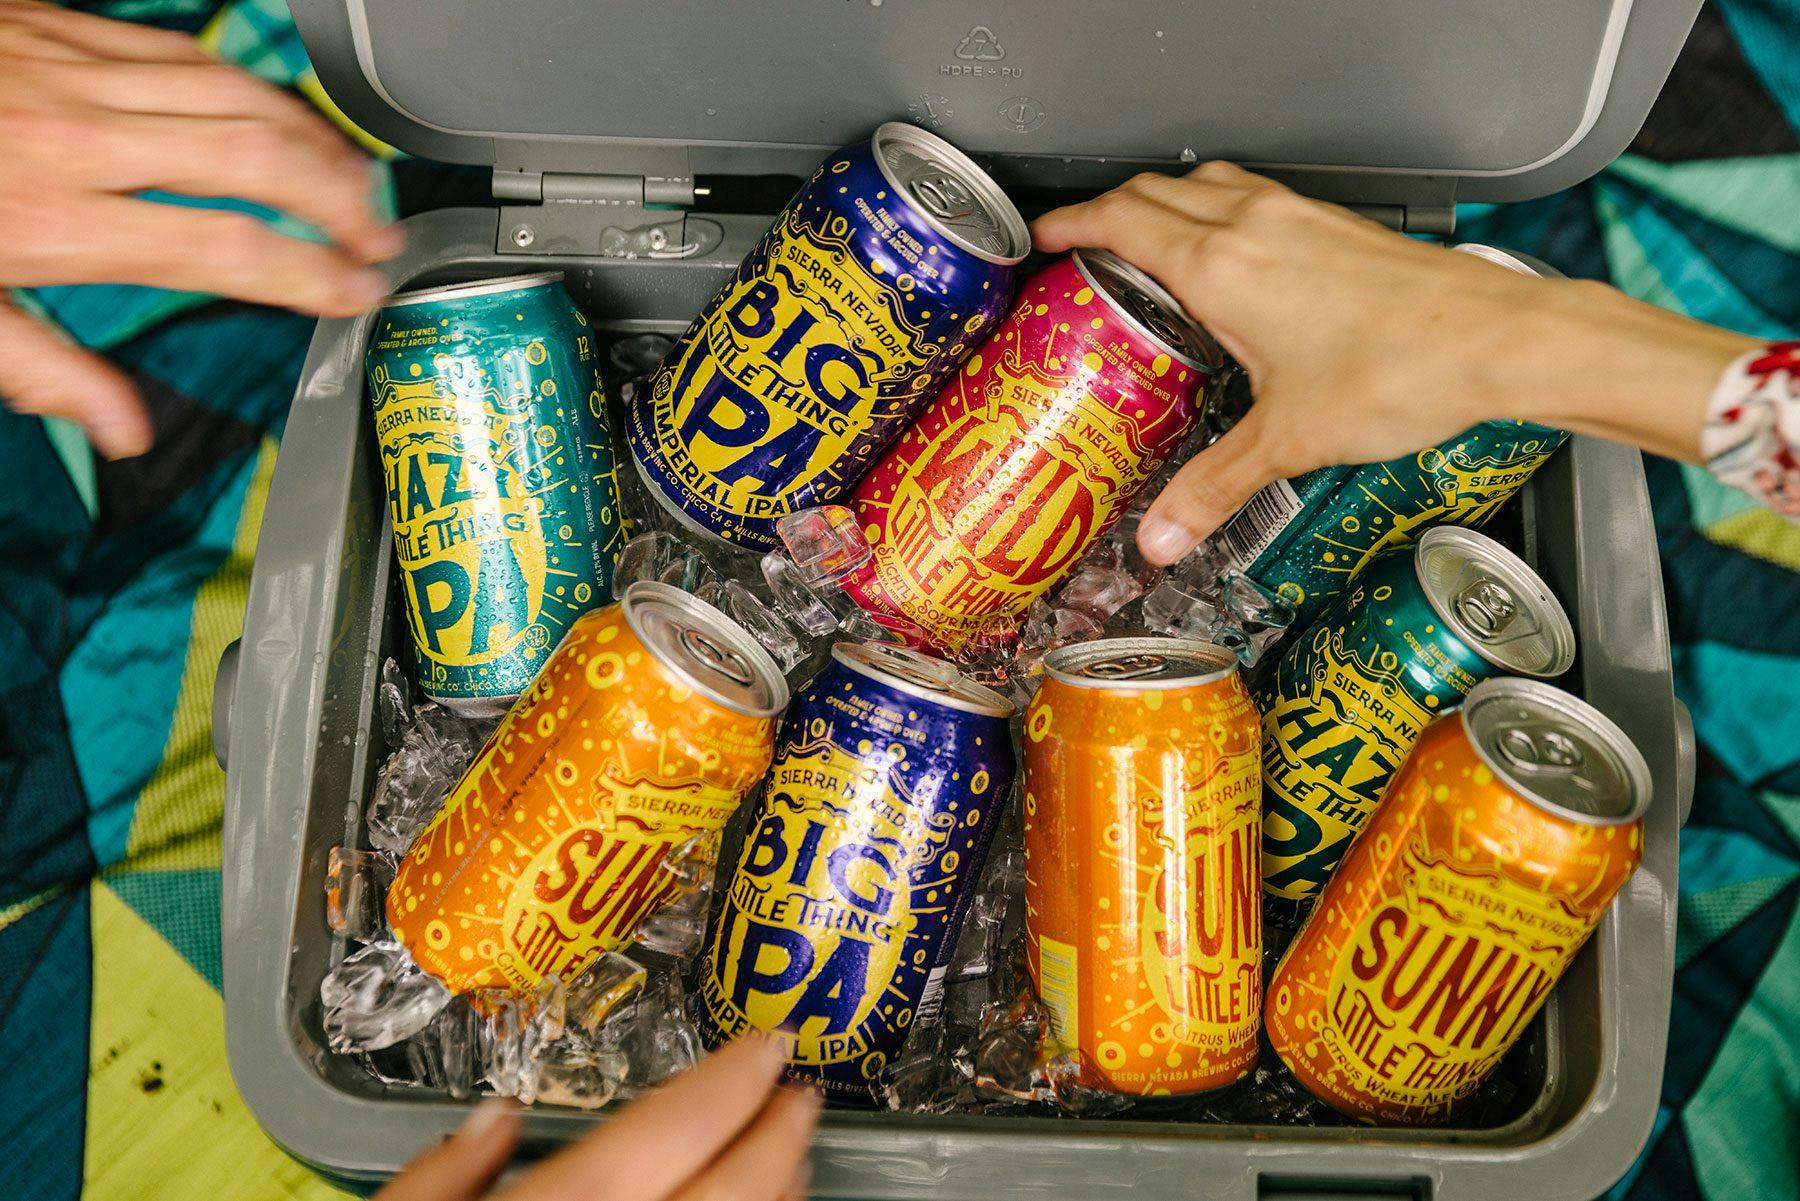 Cooler of Little Thing cans